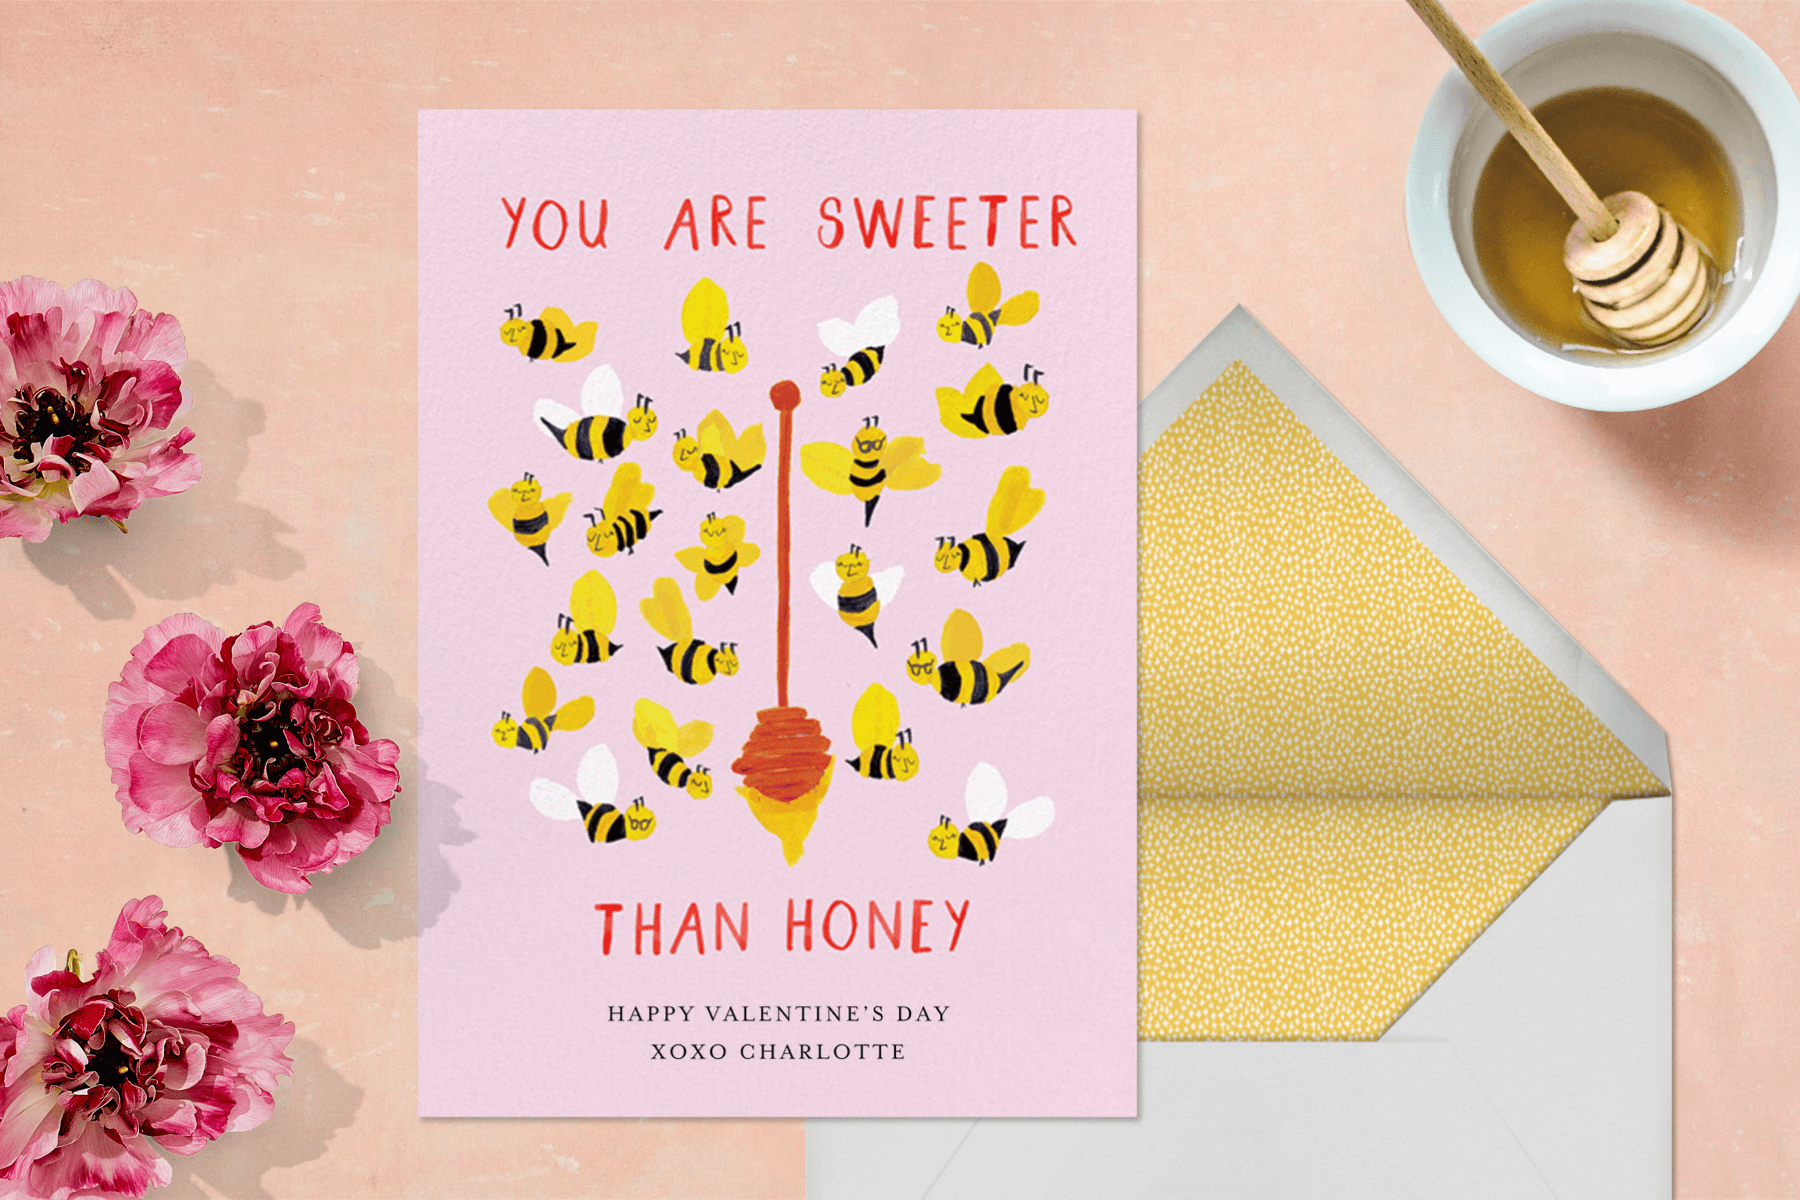 A Valentine’s Day card featuring bees around a honey dipper.